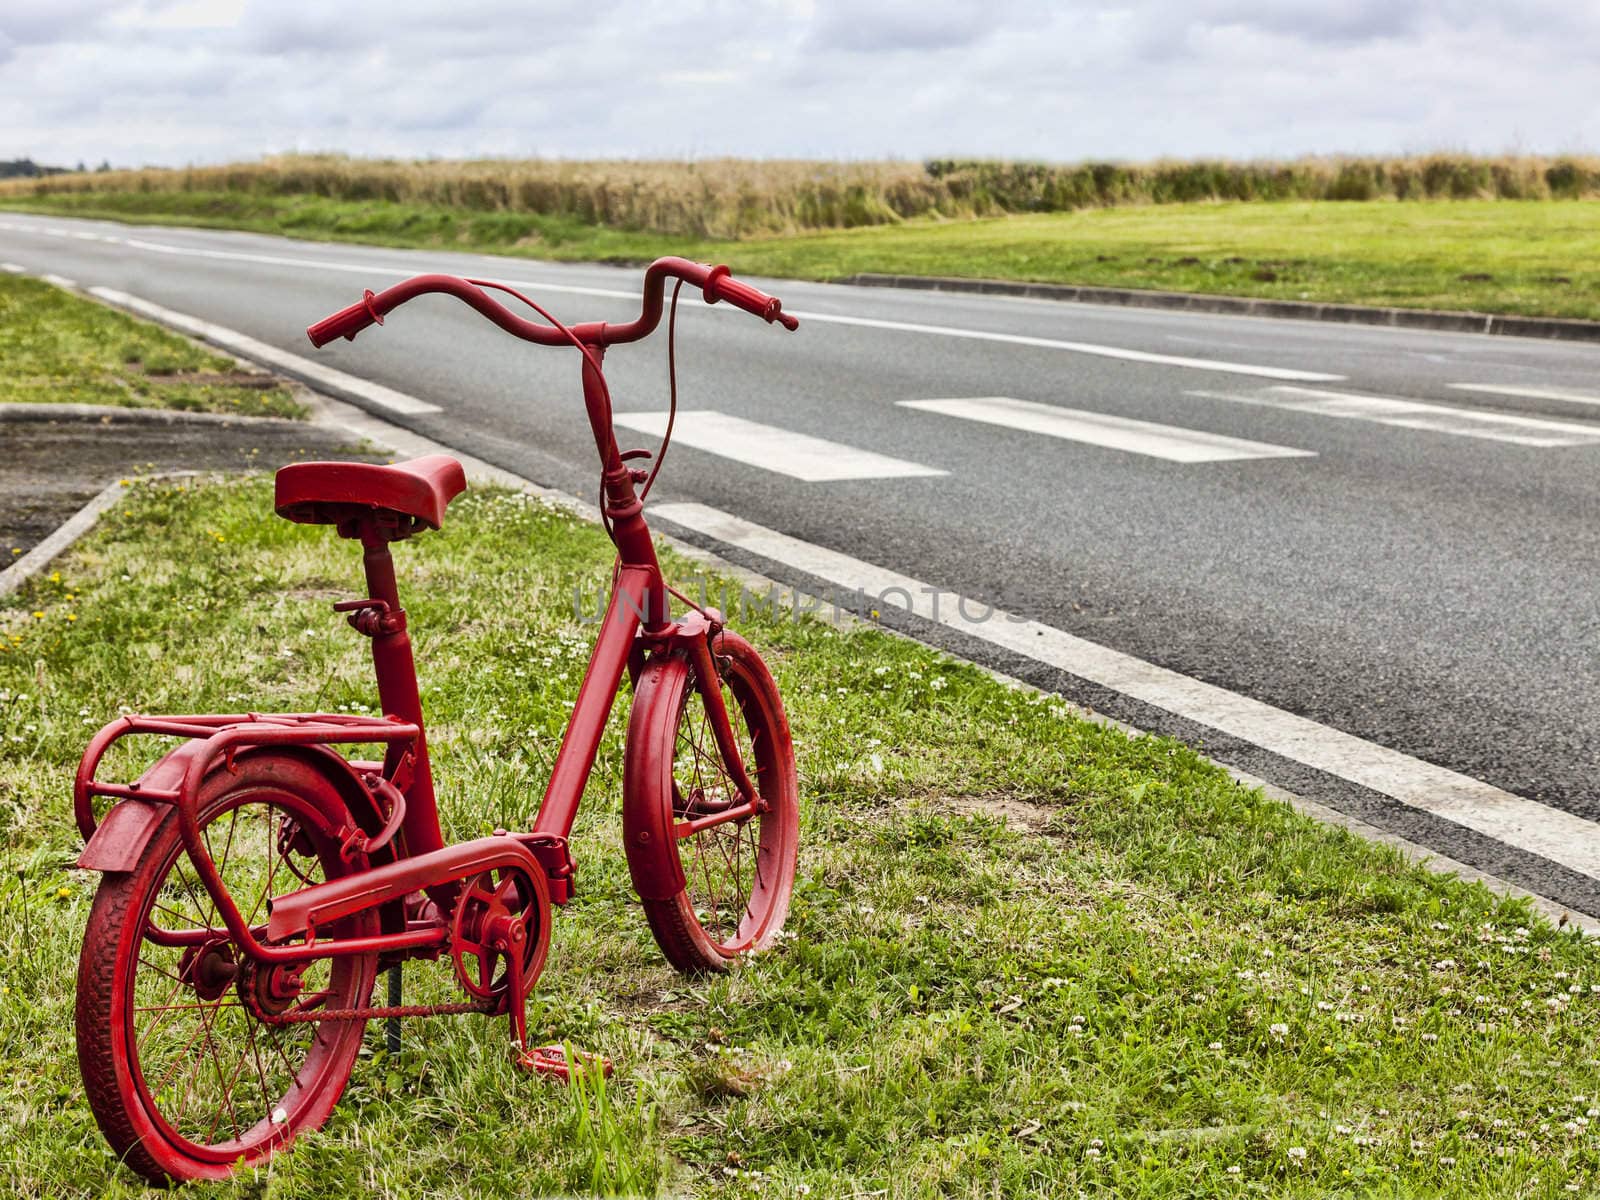 Small rusty bicycle painted in red on a roadside in a rural area.